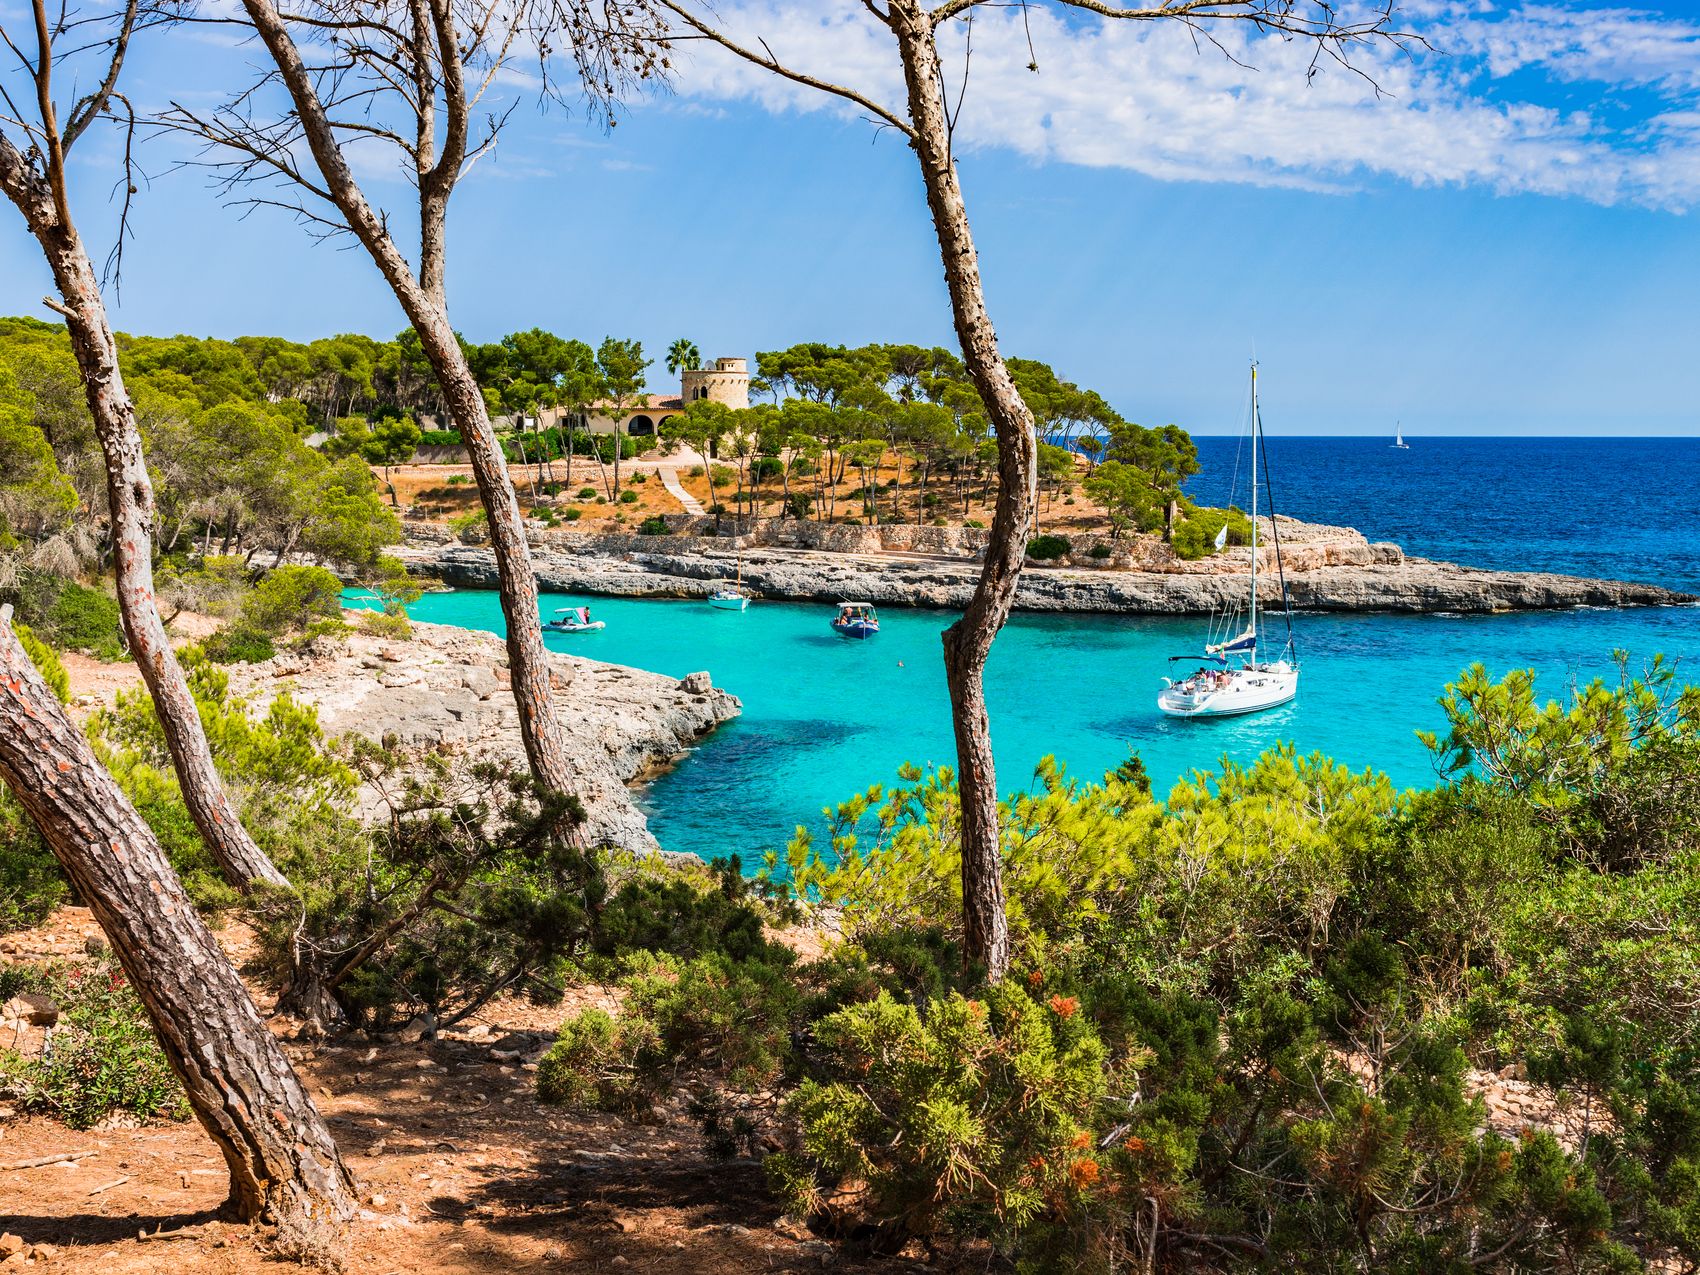 A beautiful bay with a sailboat on the island of Majorca, Spain